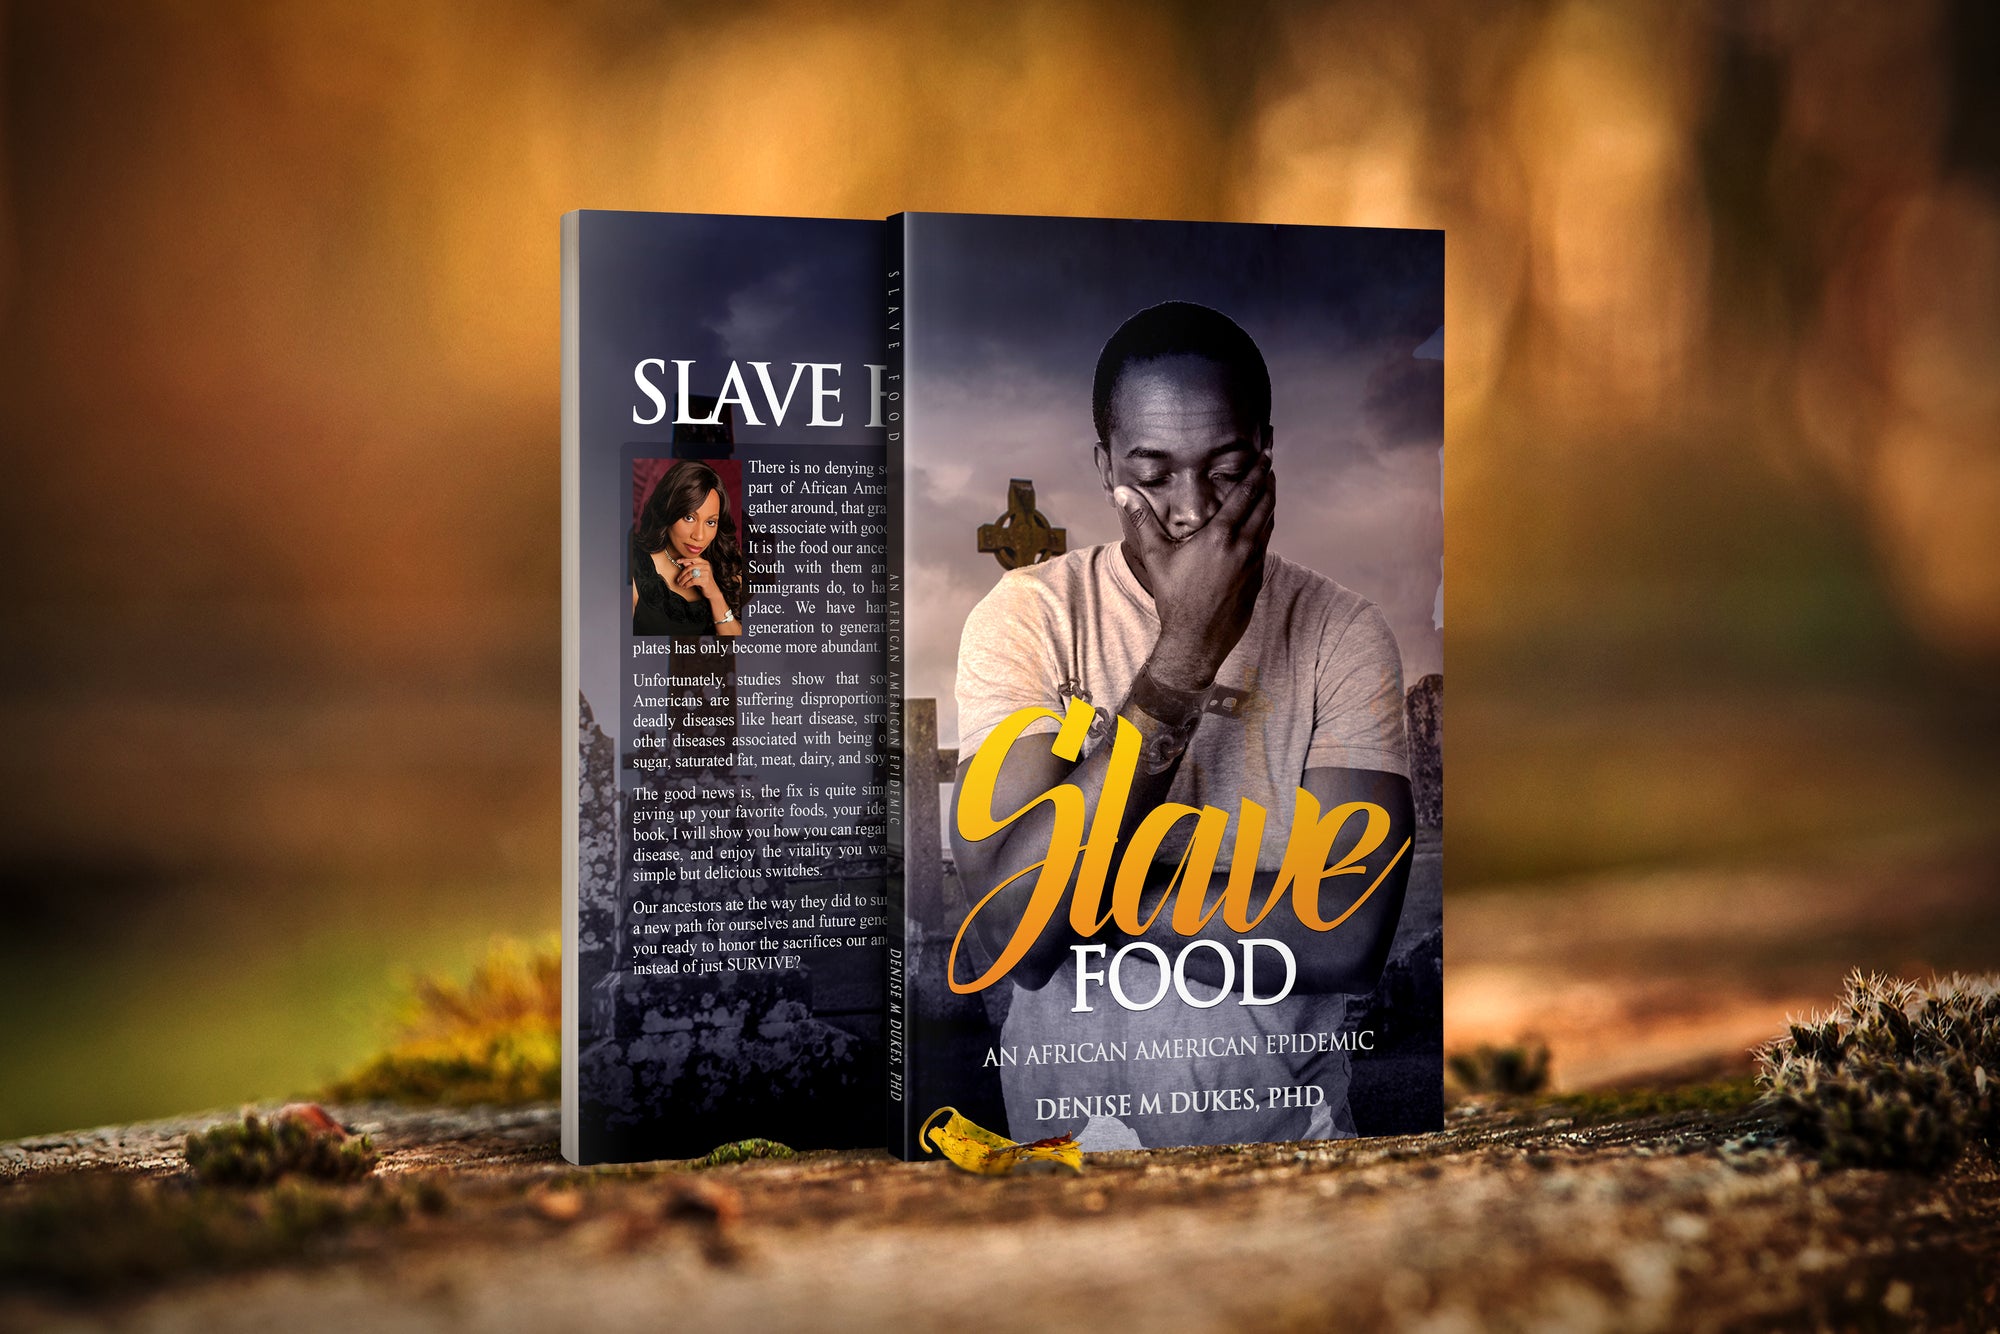 SLAVE FOOD: An African American Epidemic